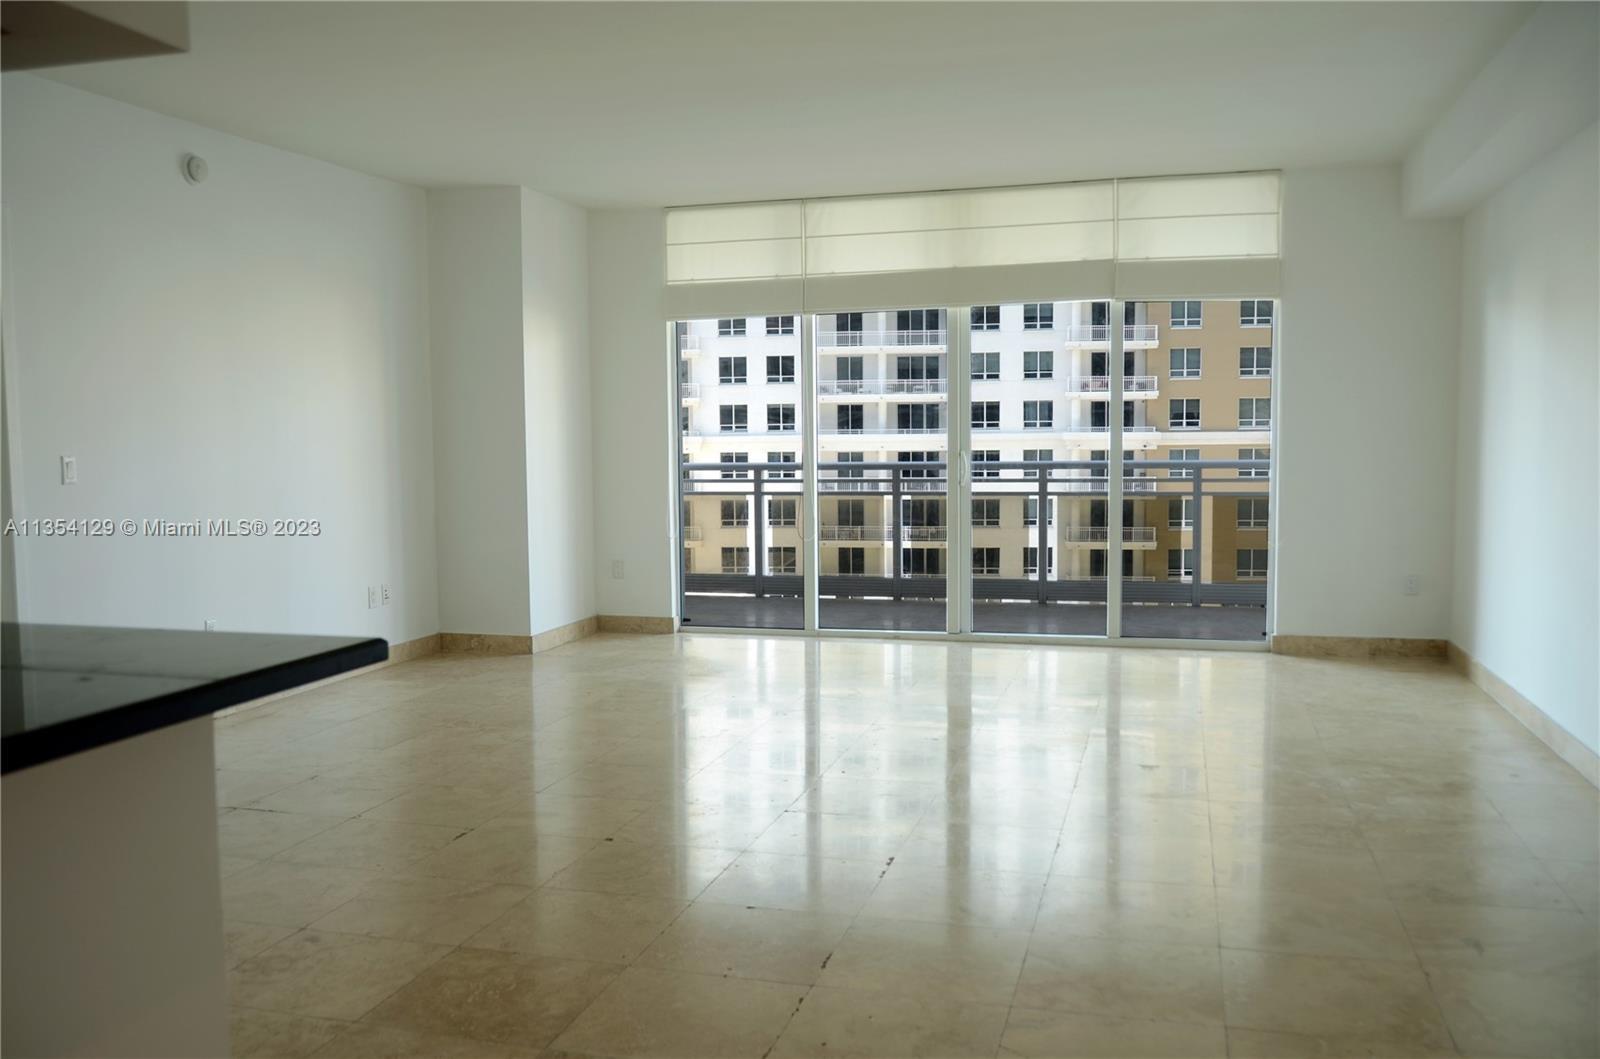 This perfectly designed unit is located at the elegantly designed Carbonell Condominium in Brickell 